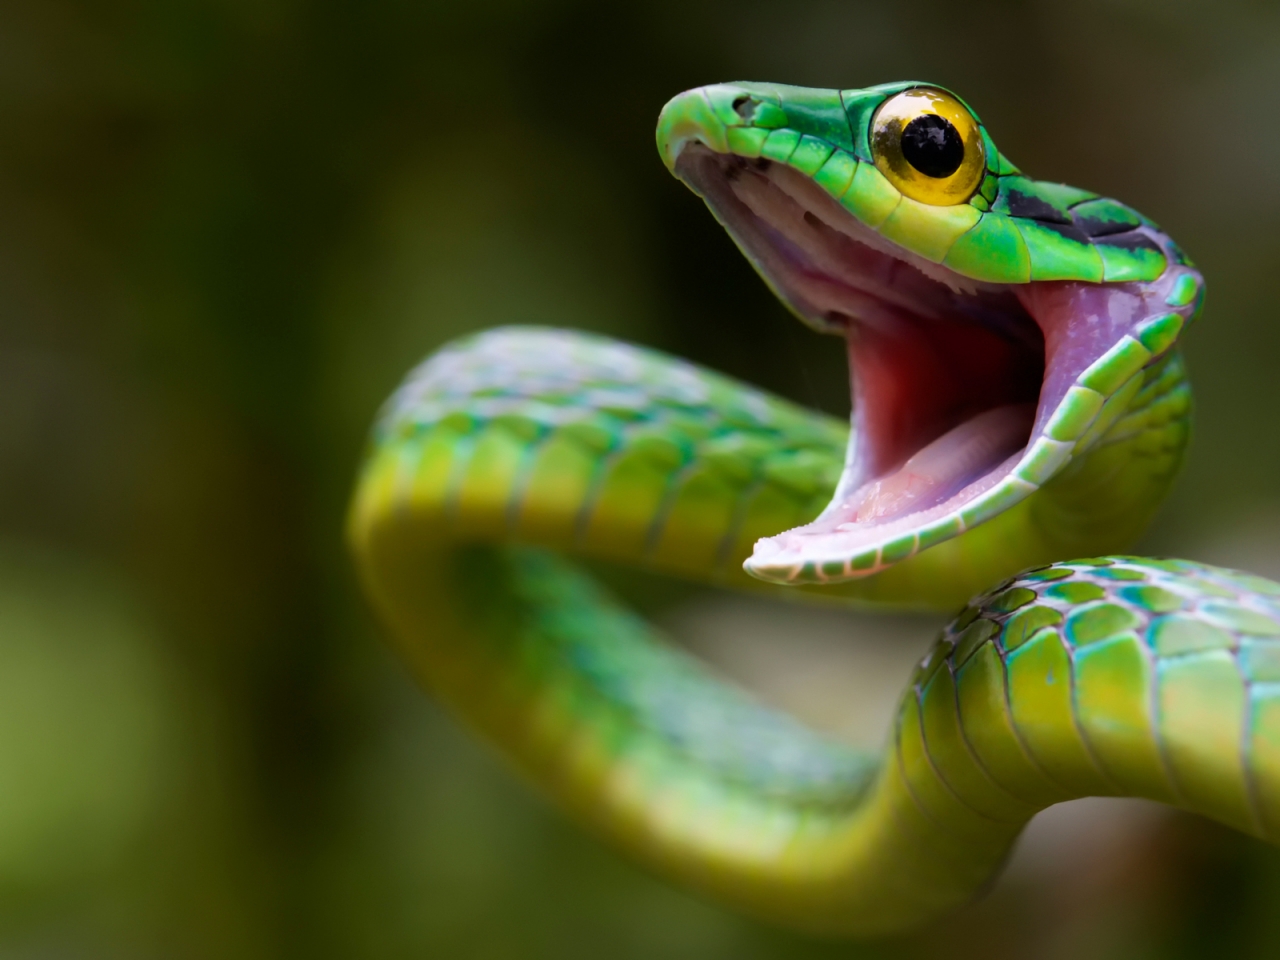 Green Snake Attack for 1280 x 960 resolution